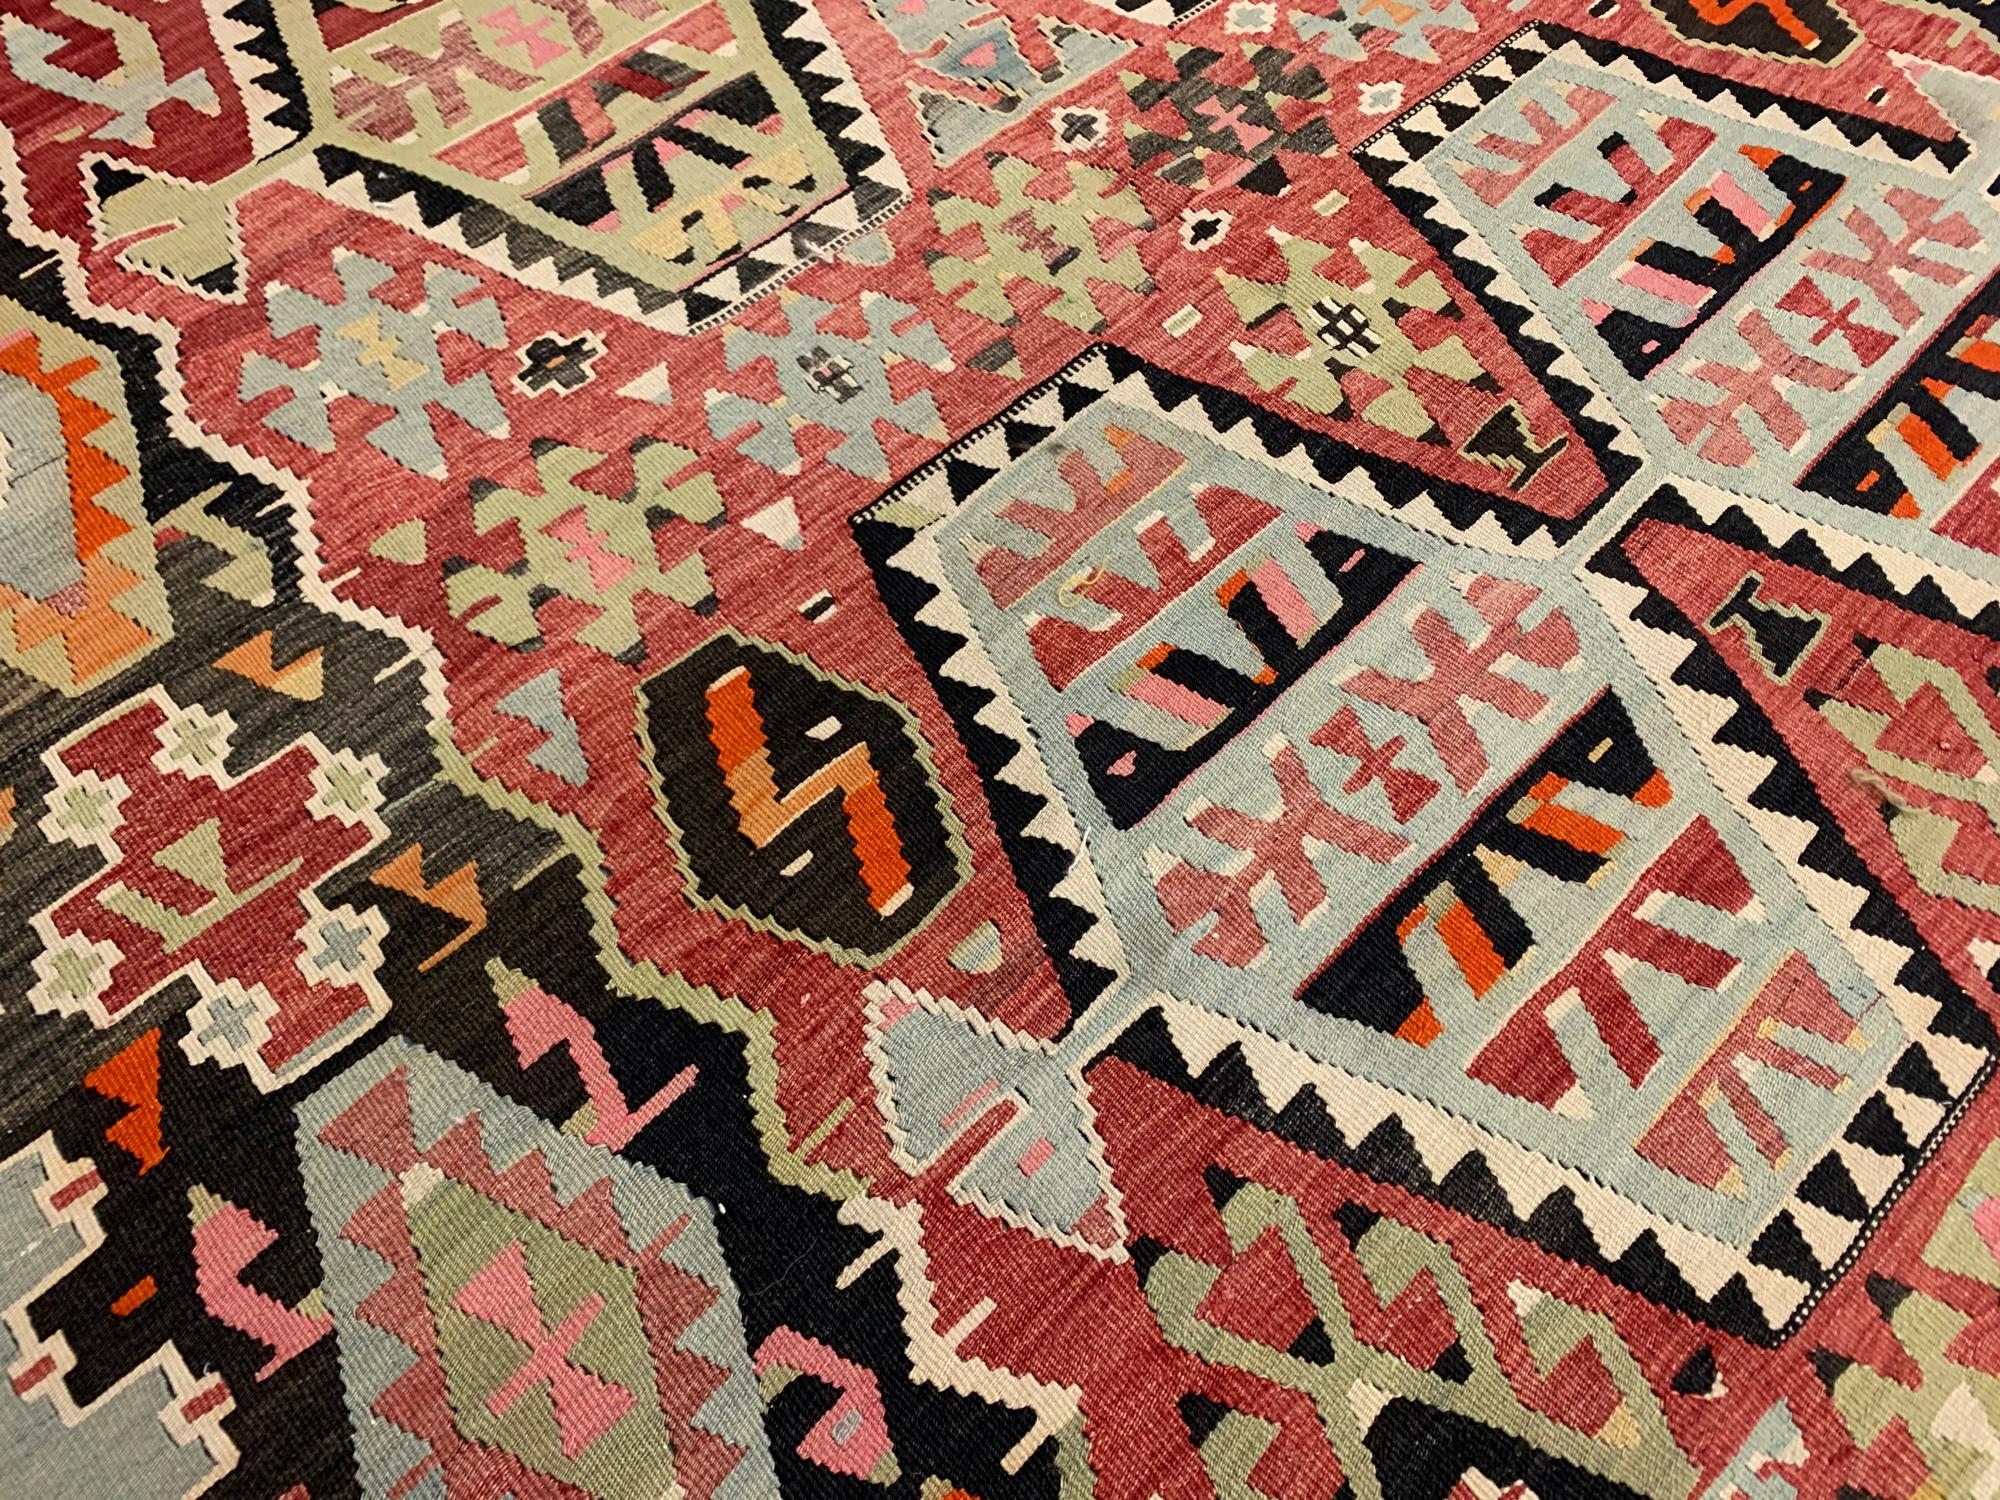 Antique Rugs Kilims Handmade Carpet, Geometric Turkish Kilim Rug In Excellent Condition For Sale In Hampshire, GB